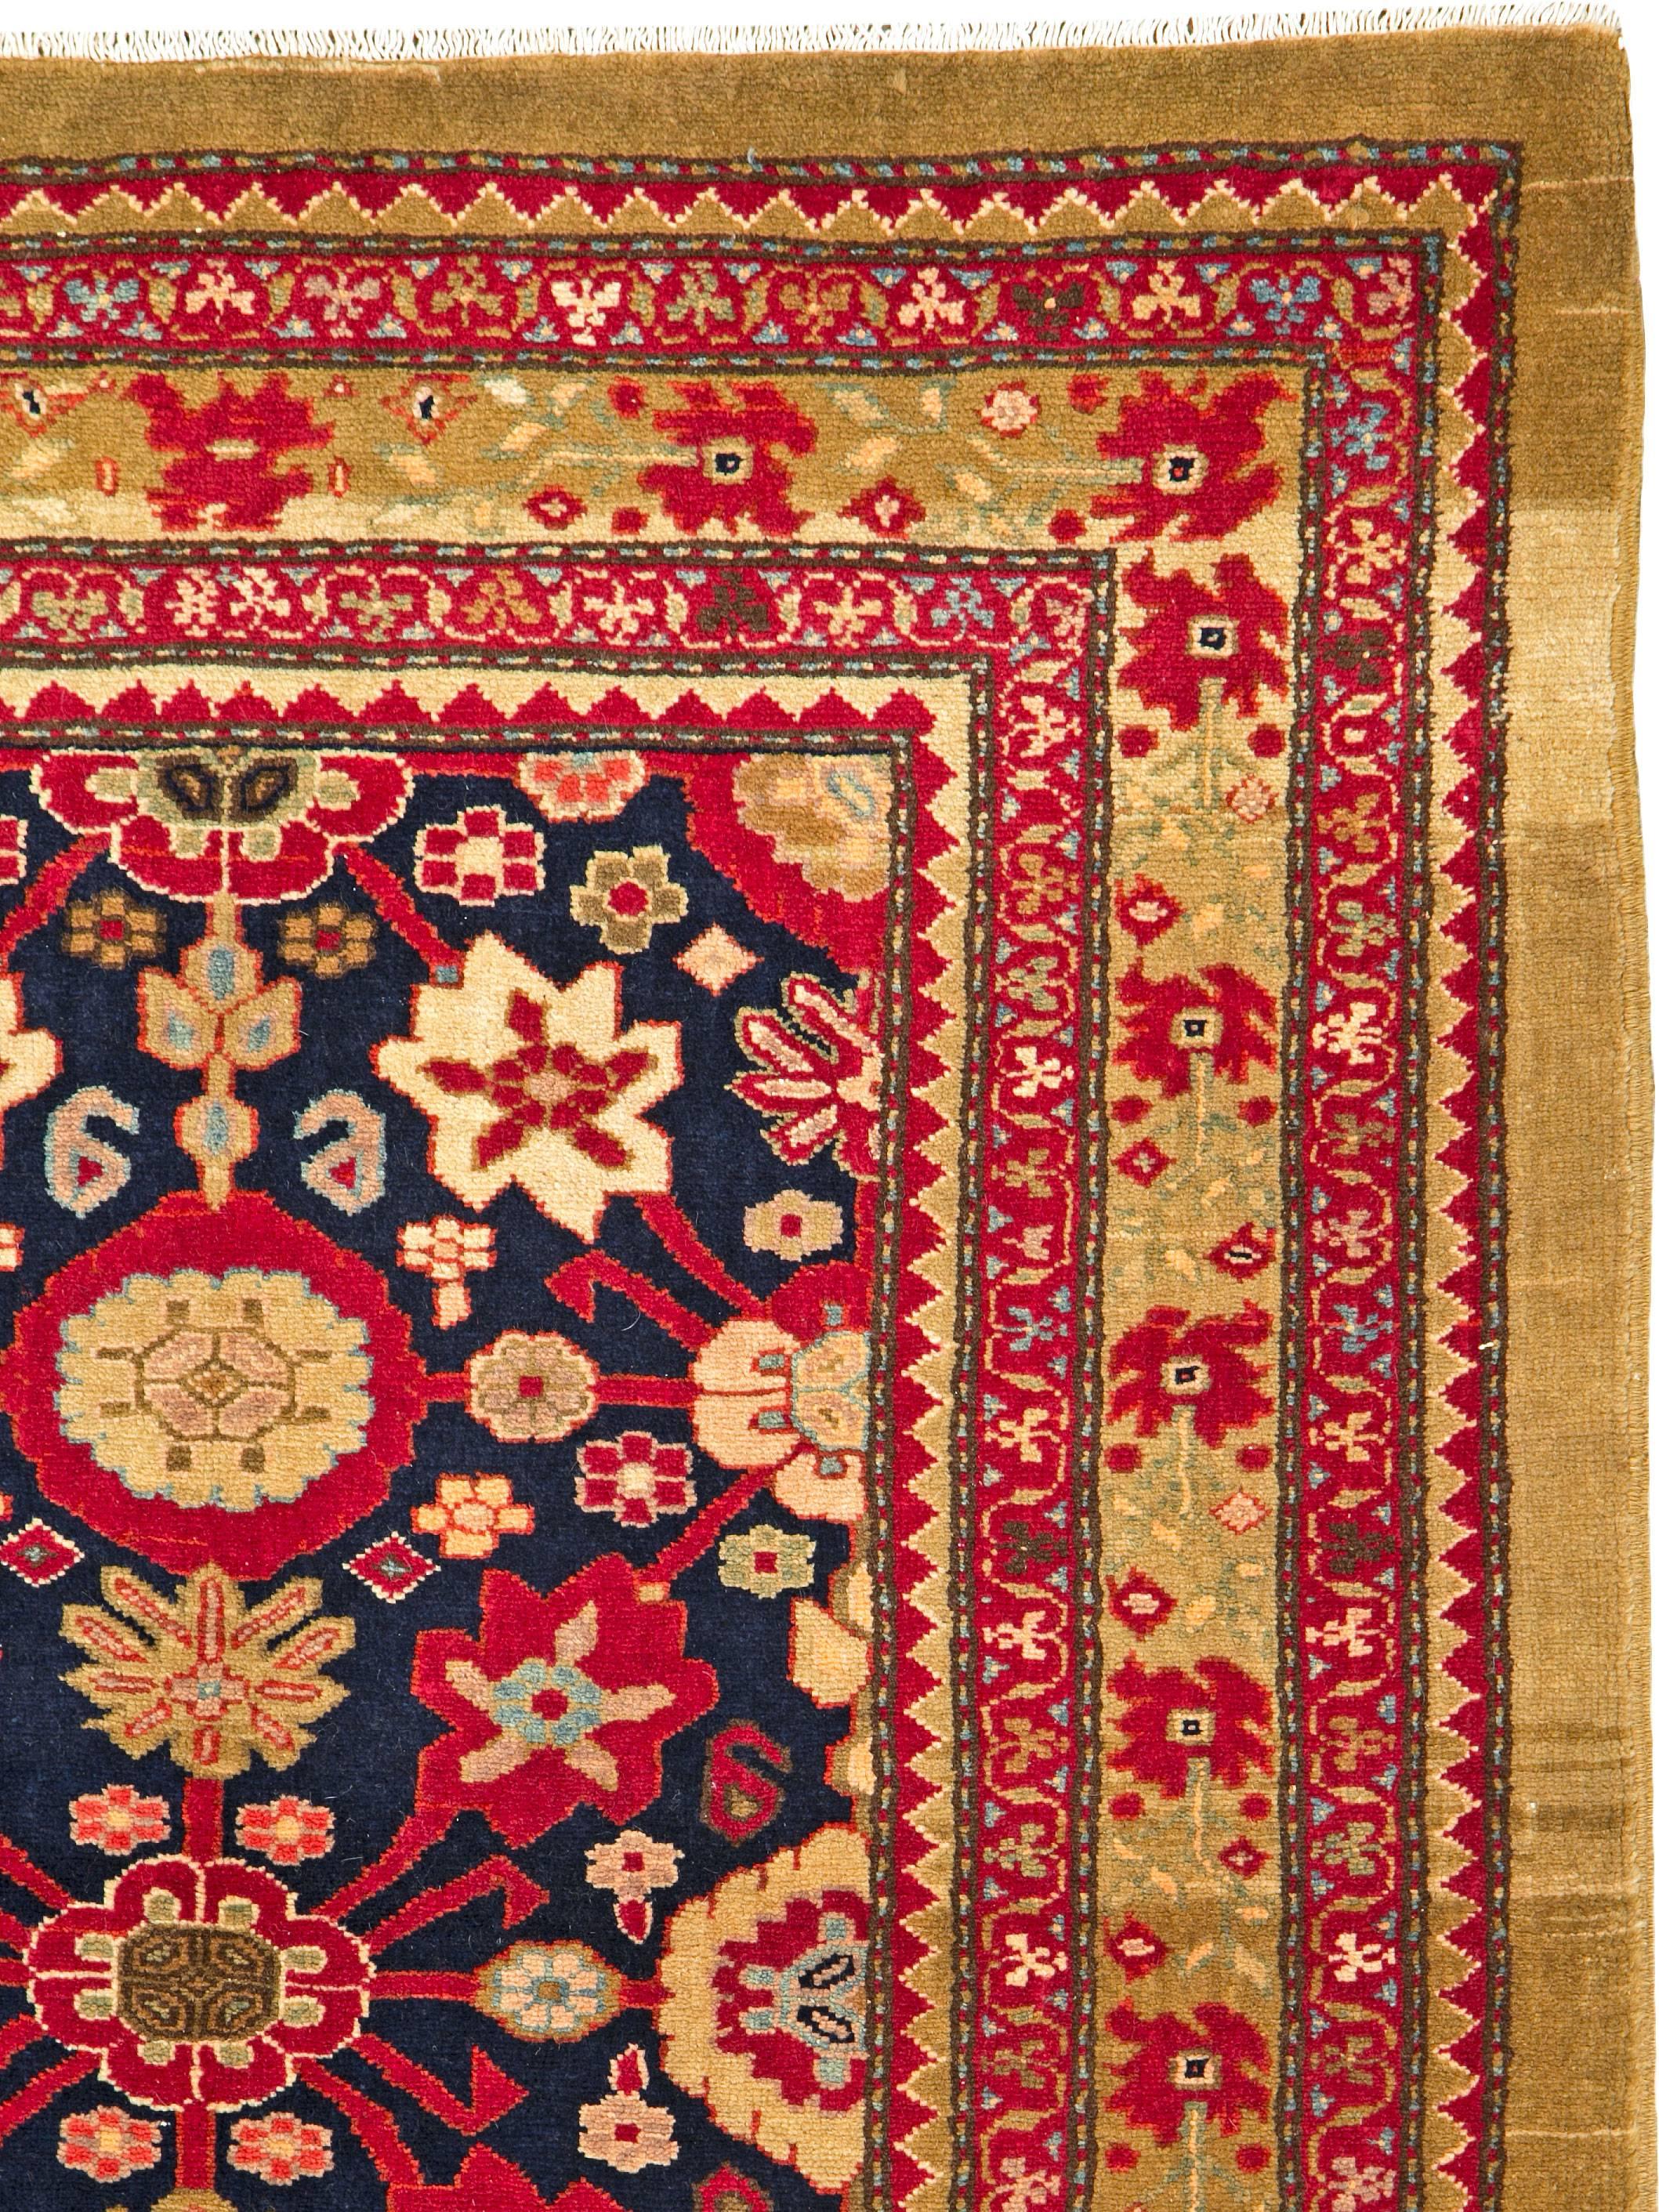 A Persian Malayer carpet from the 21st century.